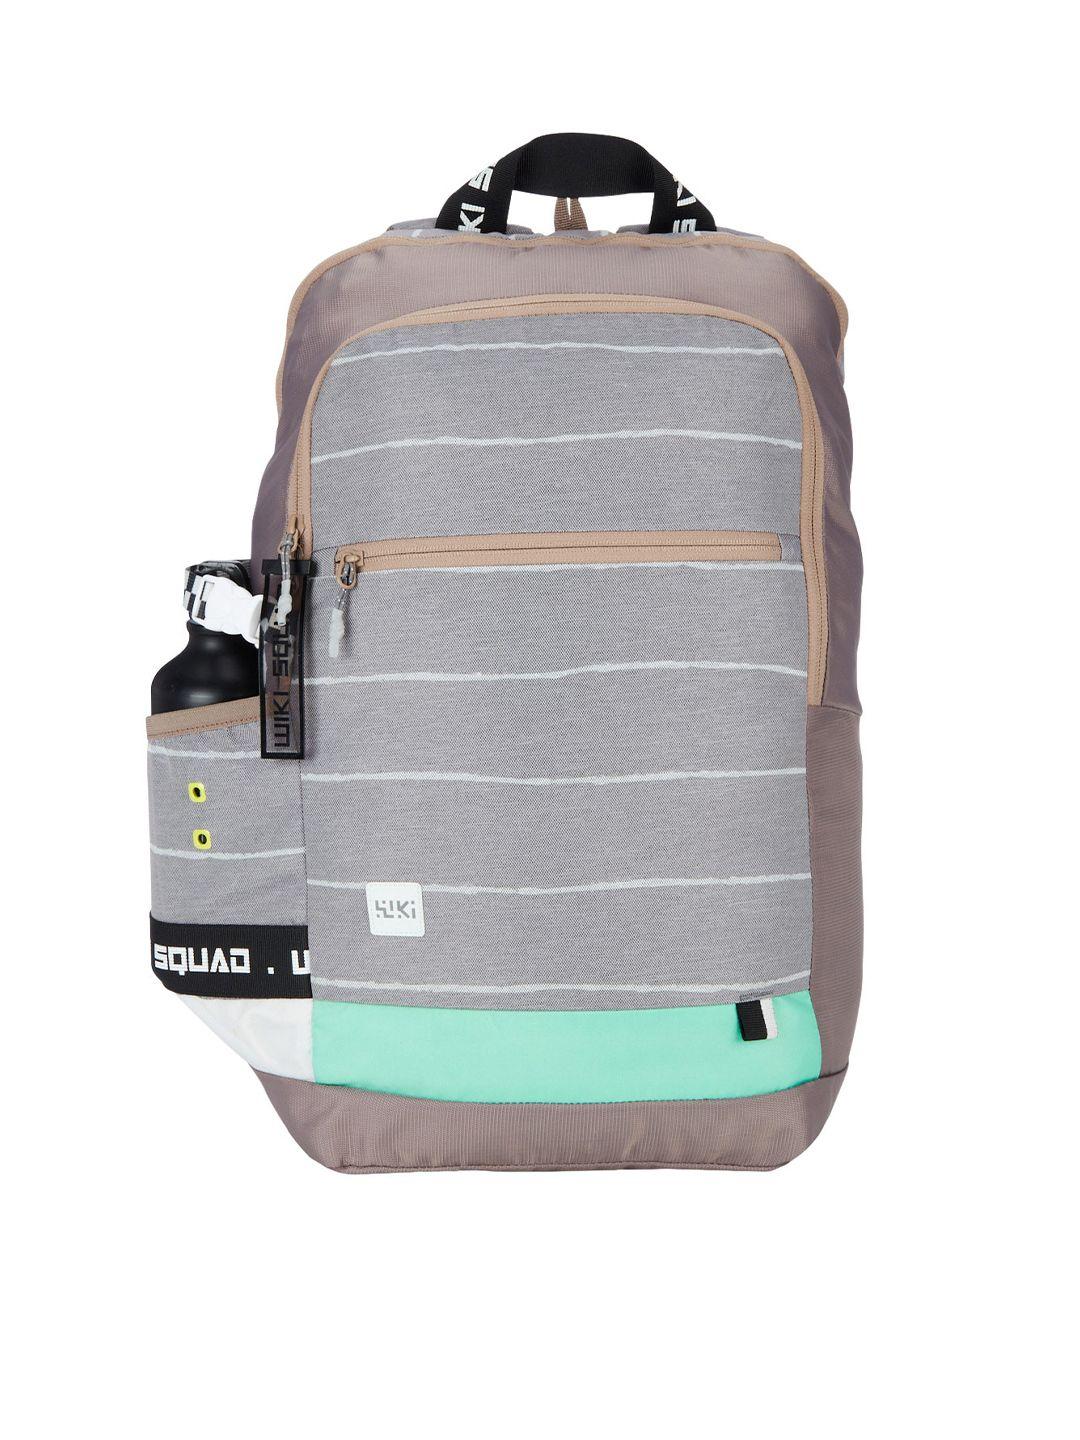 wildcraft striped squad 1 backpack